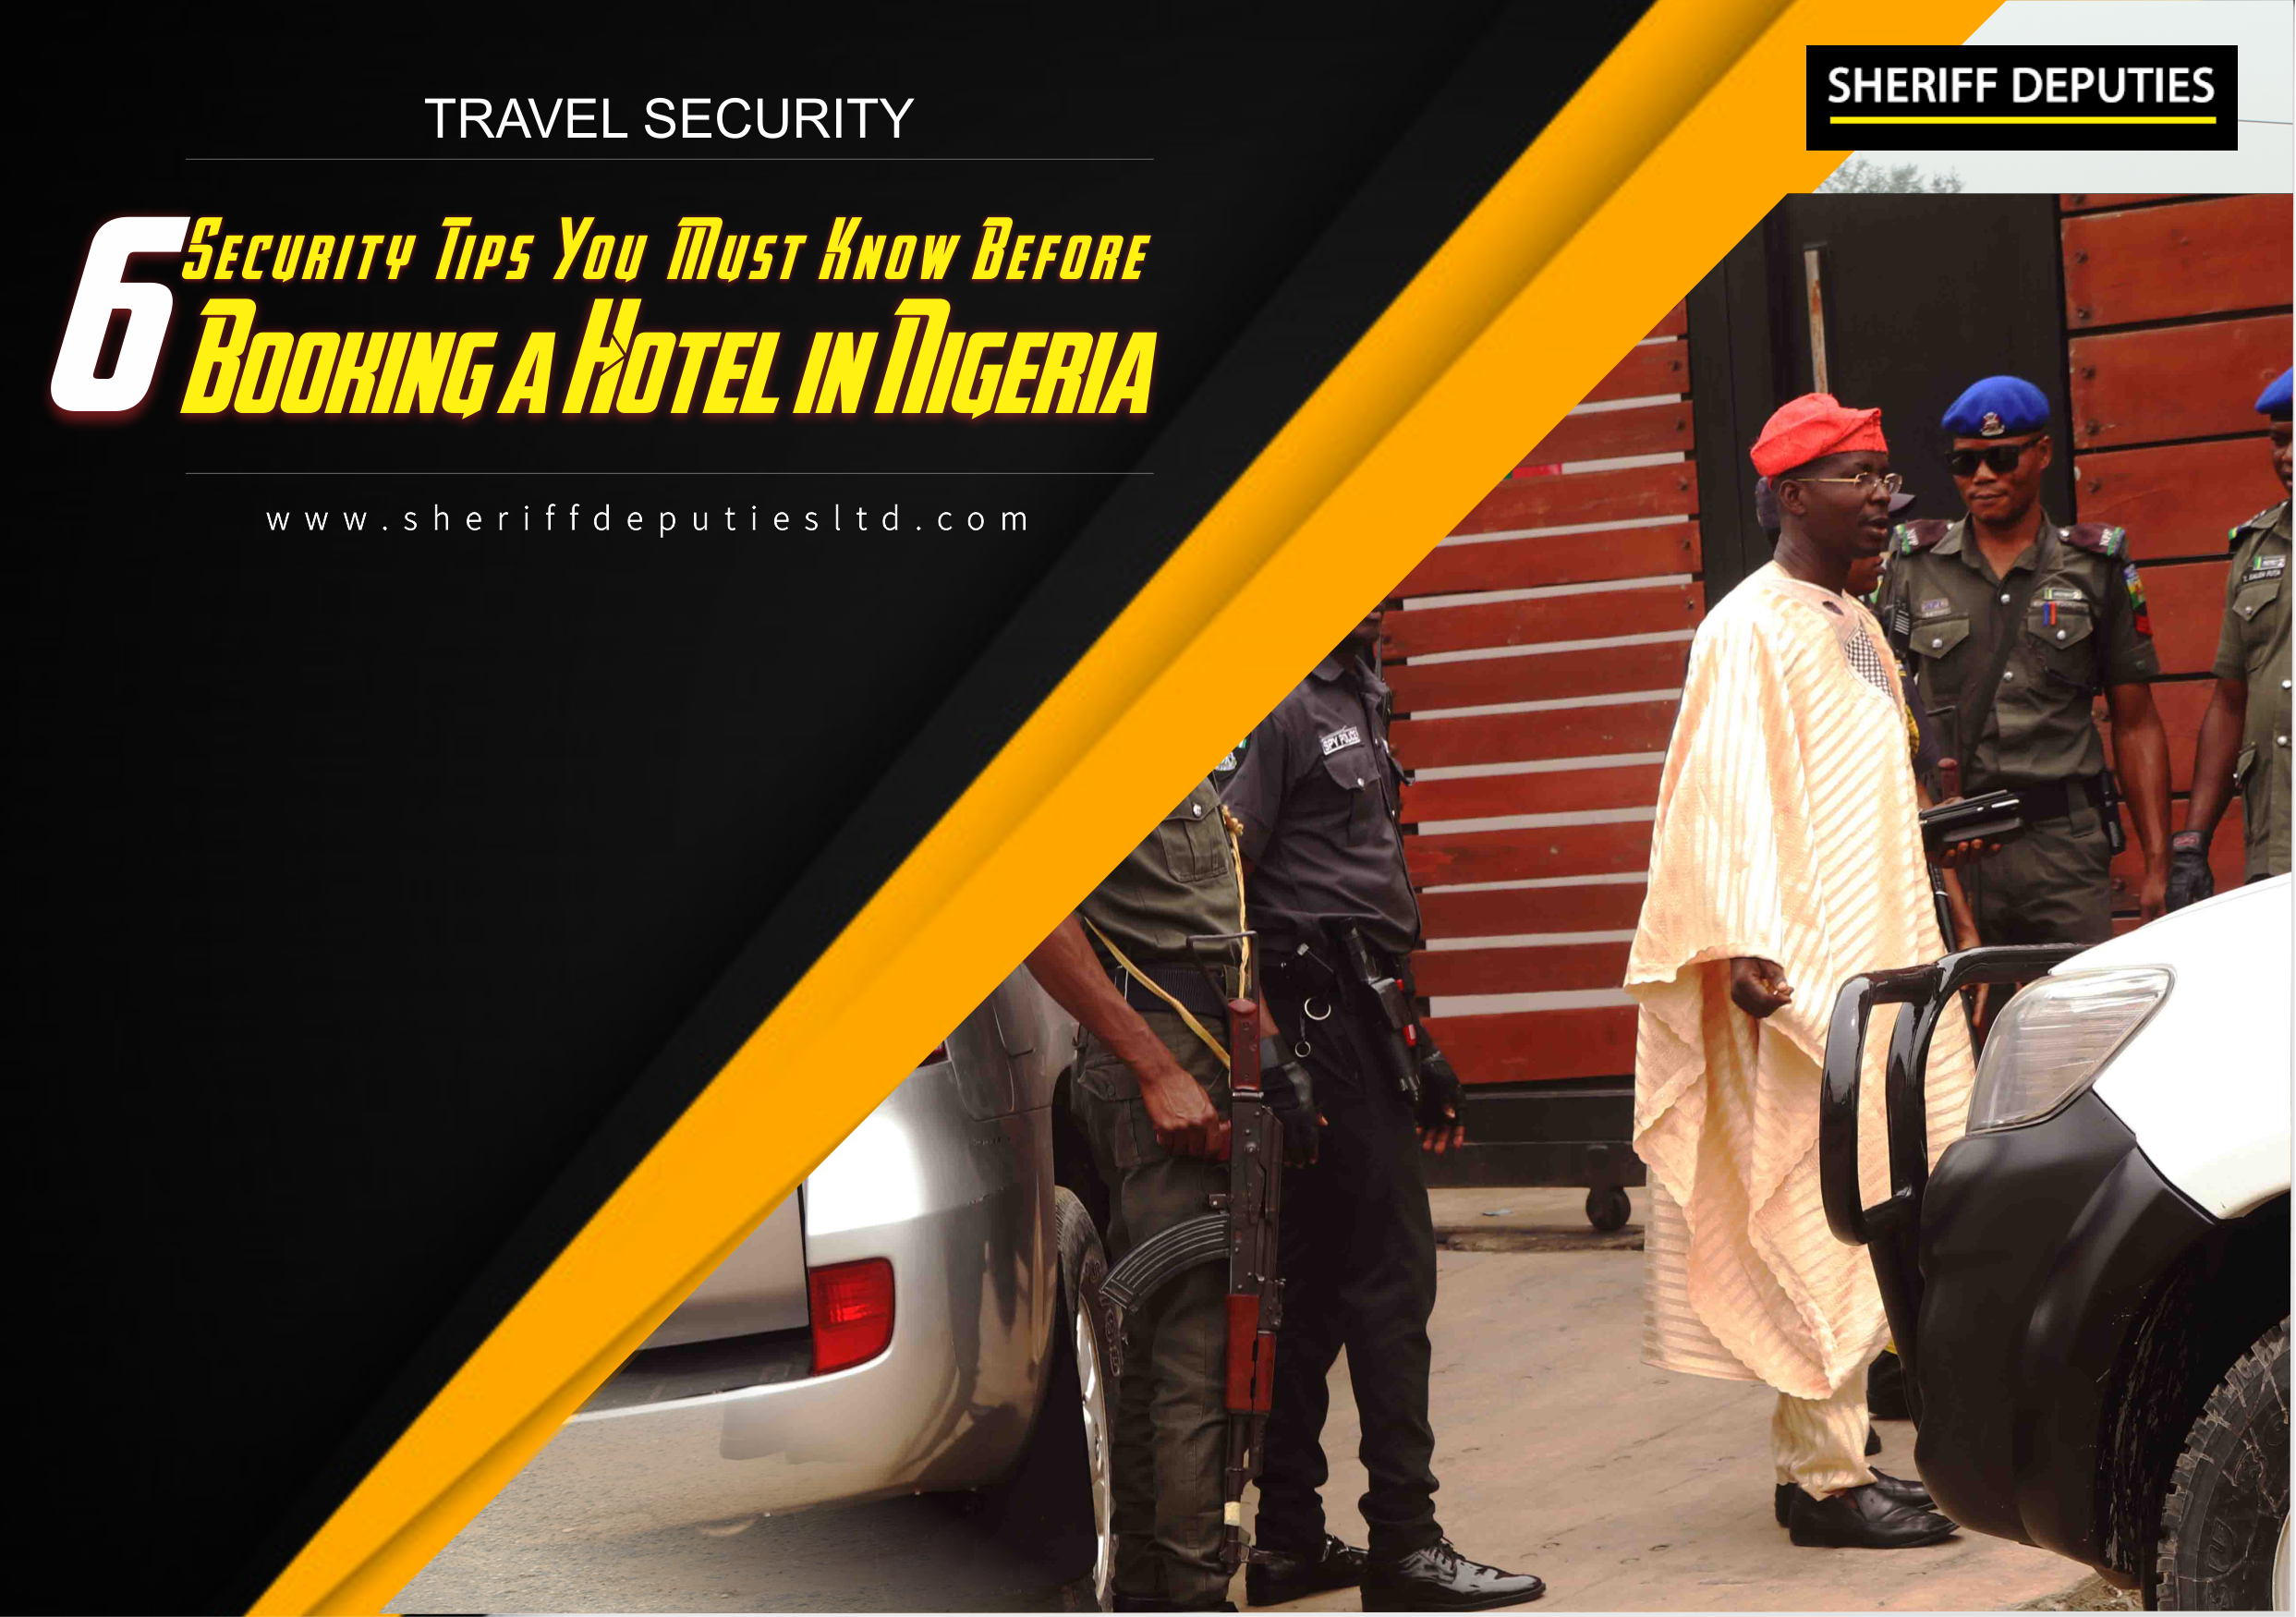 TRAVEL SECURITY: 6 Security Tips You Must Know Before Booking a Hotel in Nigeria